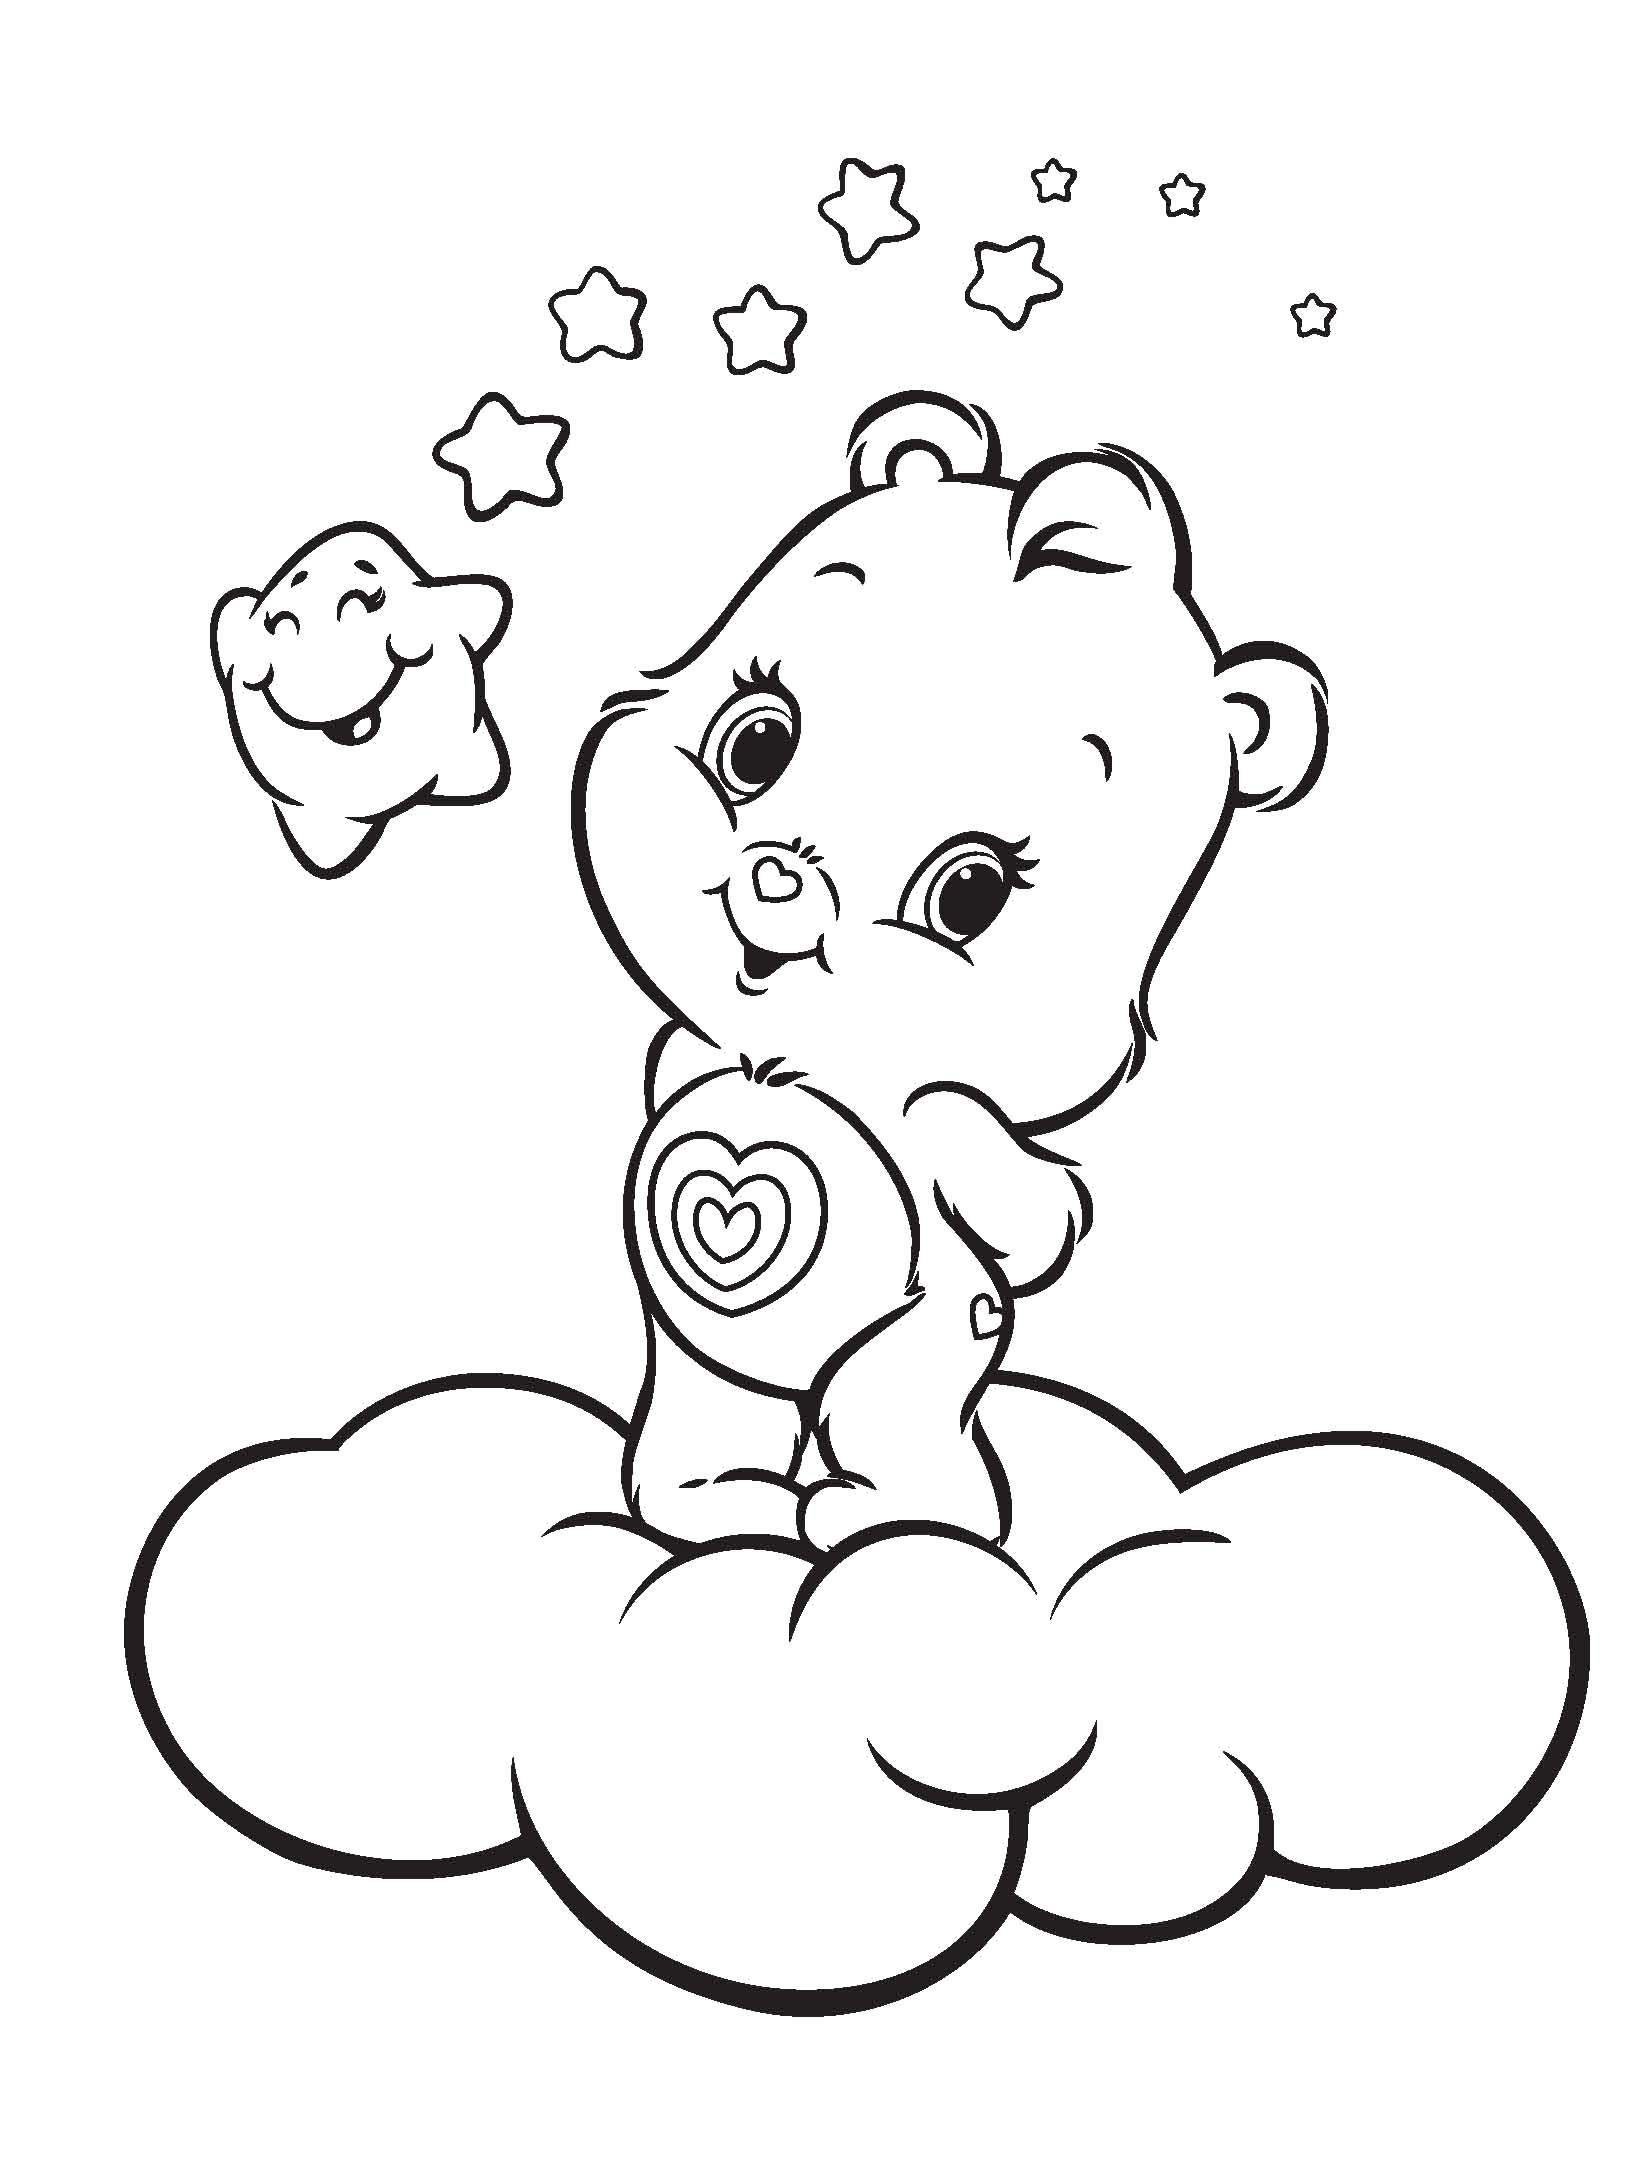 Three Little Bears Coloring Pages Free Download - Coloring Home